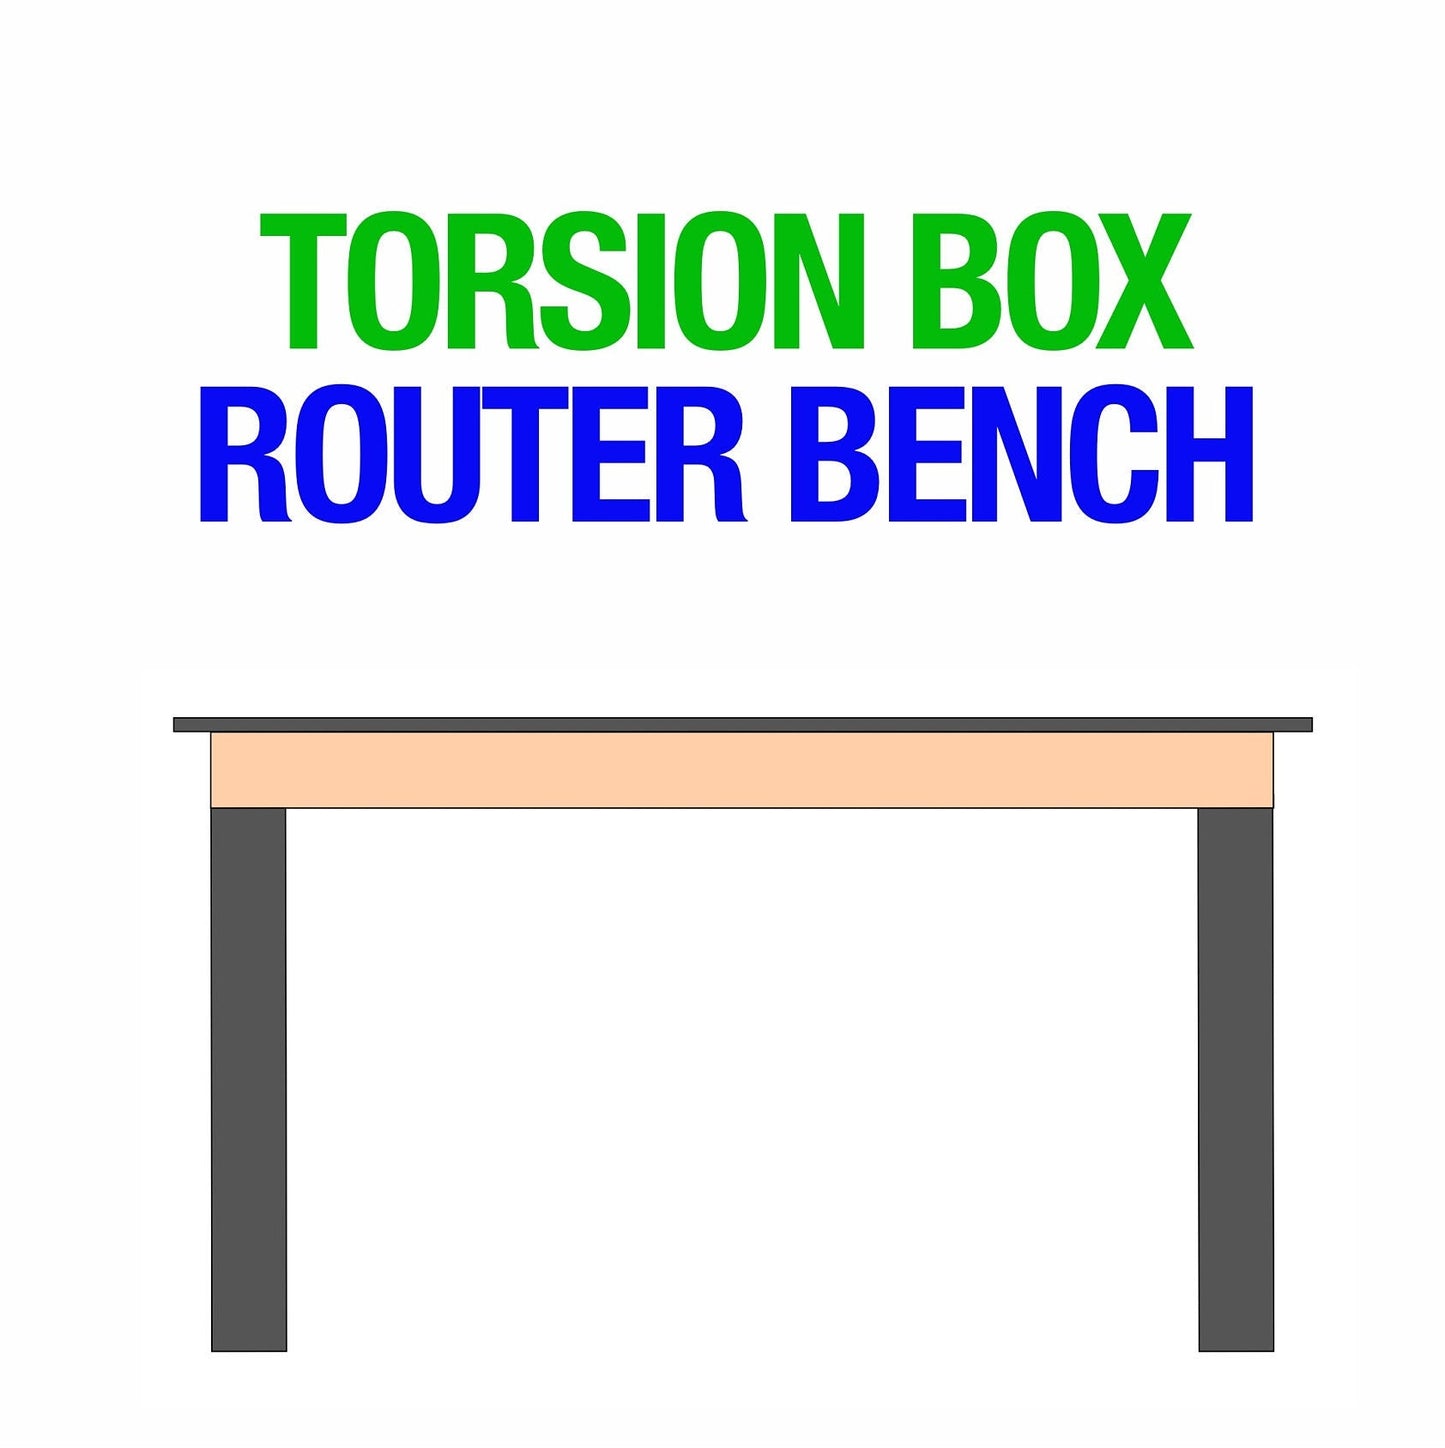 Torsion Box Router Bench, Fence, and Cabinet bundle